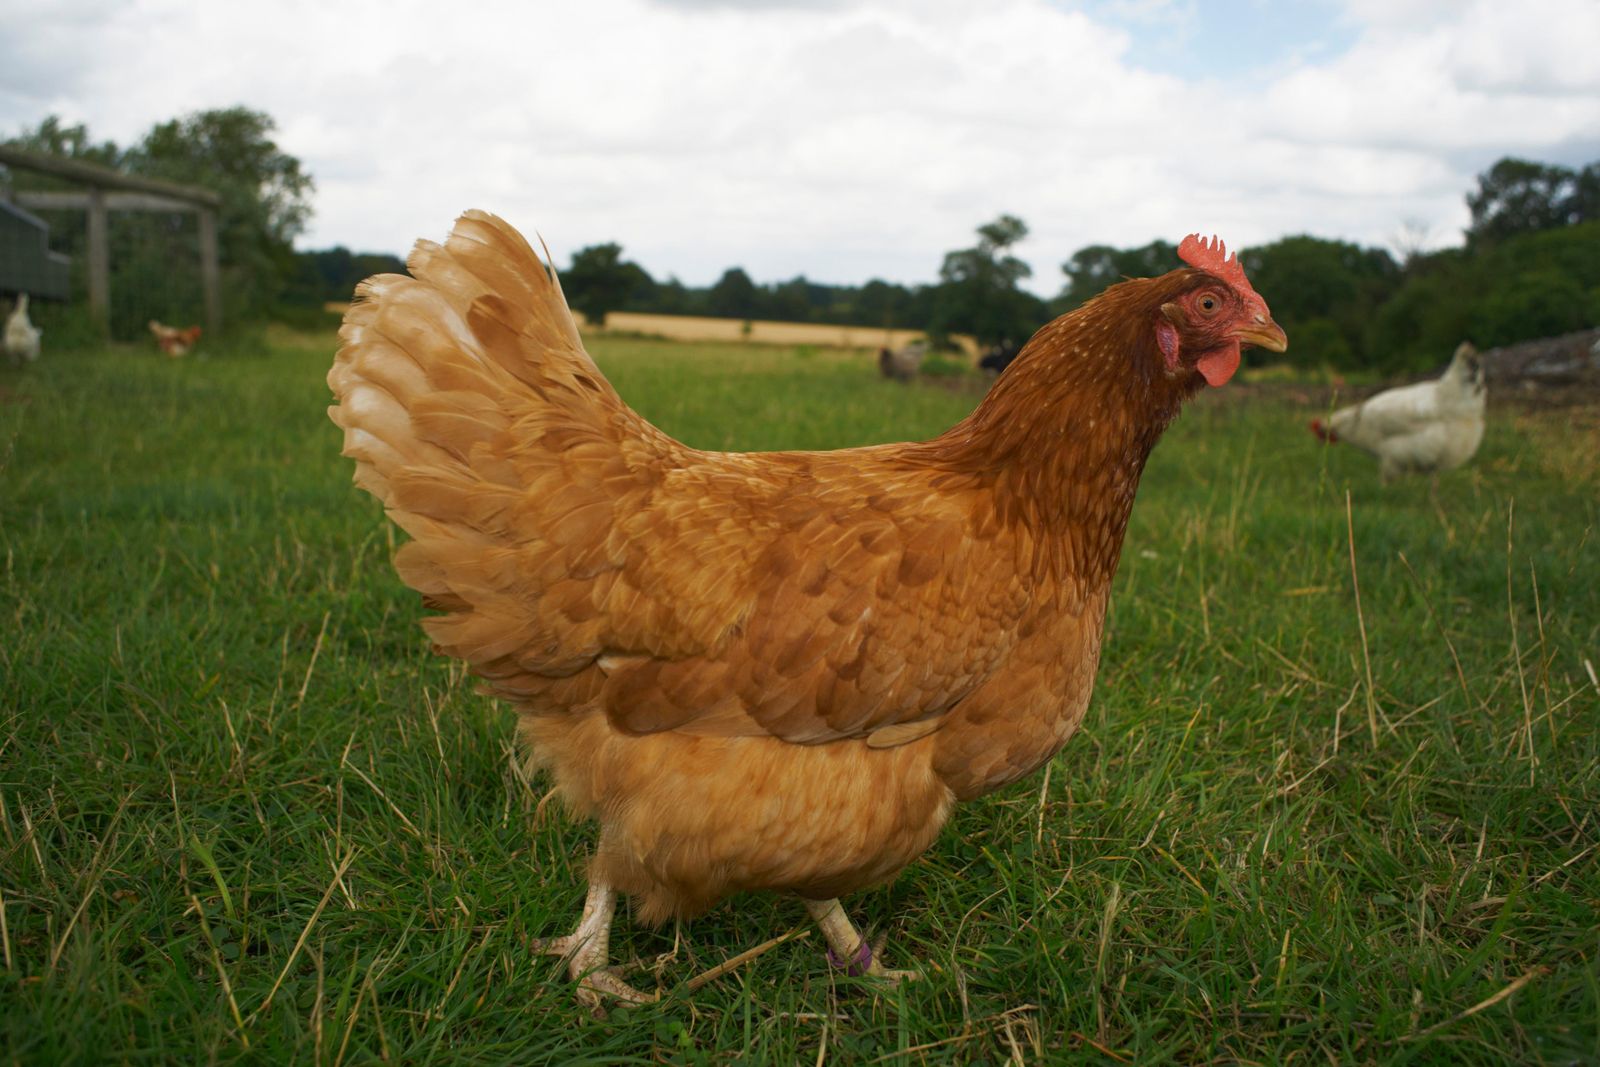 All hail the hen! Chickens were revered for centuries before they